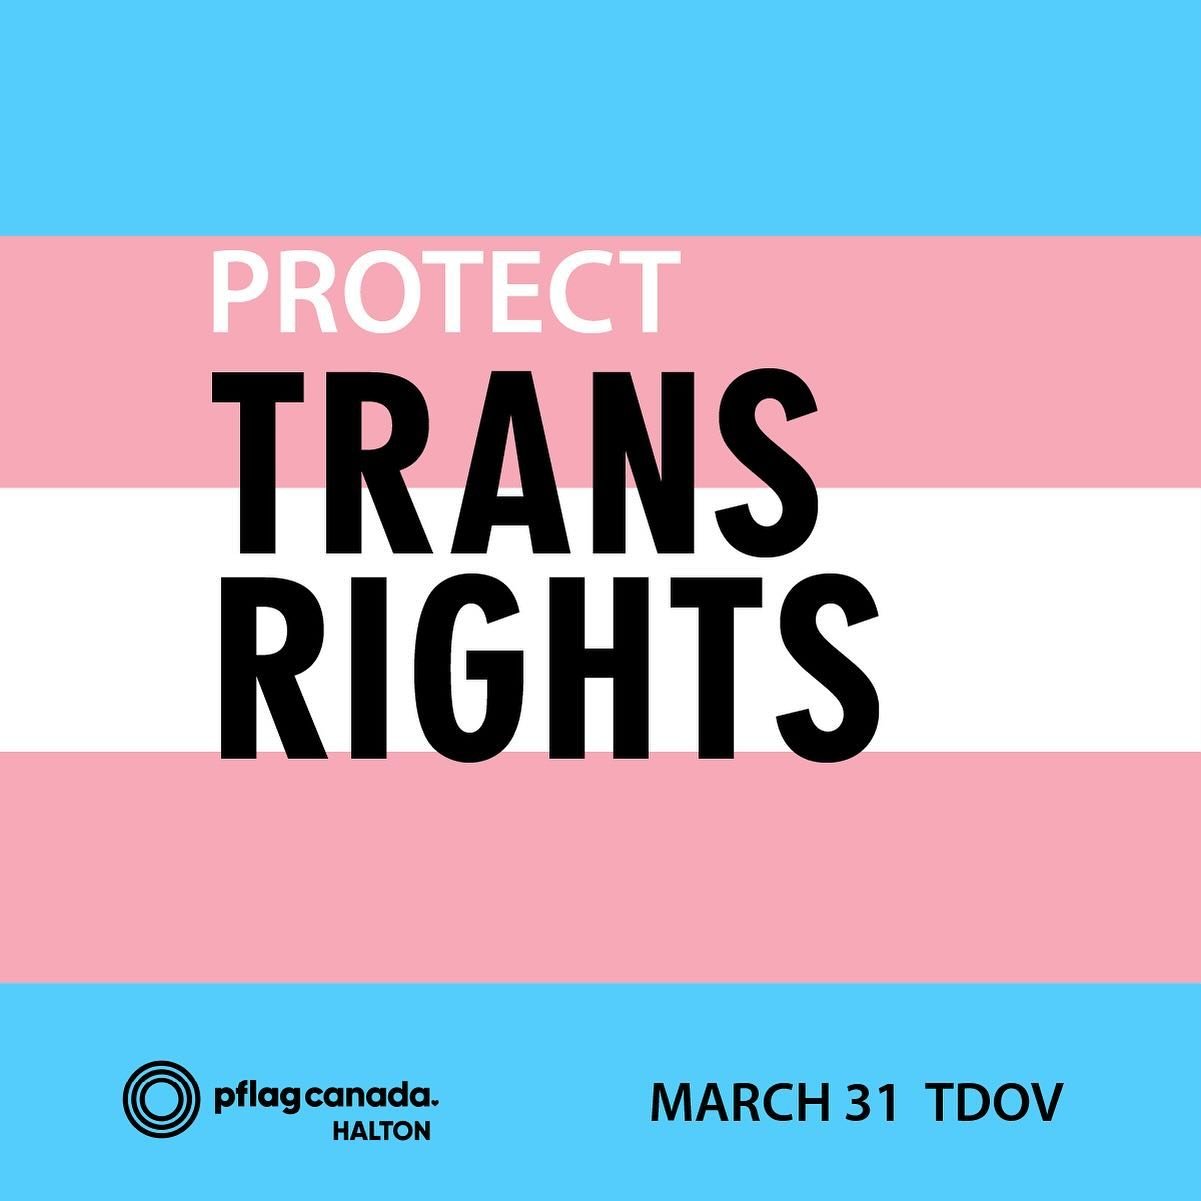 Today is International Transgender Day of Visibility (TDOV) 🏳️&zwj;⚧️ where we celebrate trans joy🩵, trans love🩷and trans courage🤍 in the face of growing discrimination and transphobia. 

We see you. You are loved.
Trans rights are human rights.
